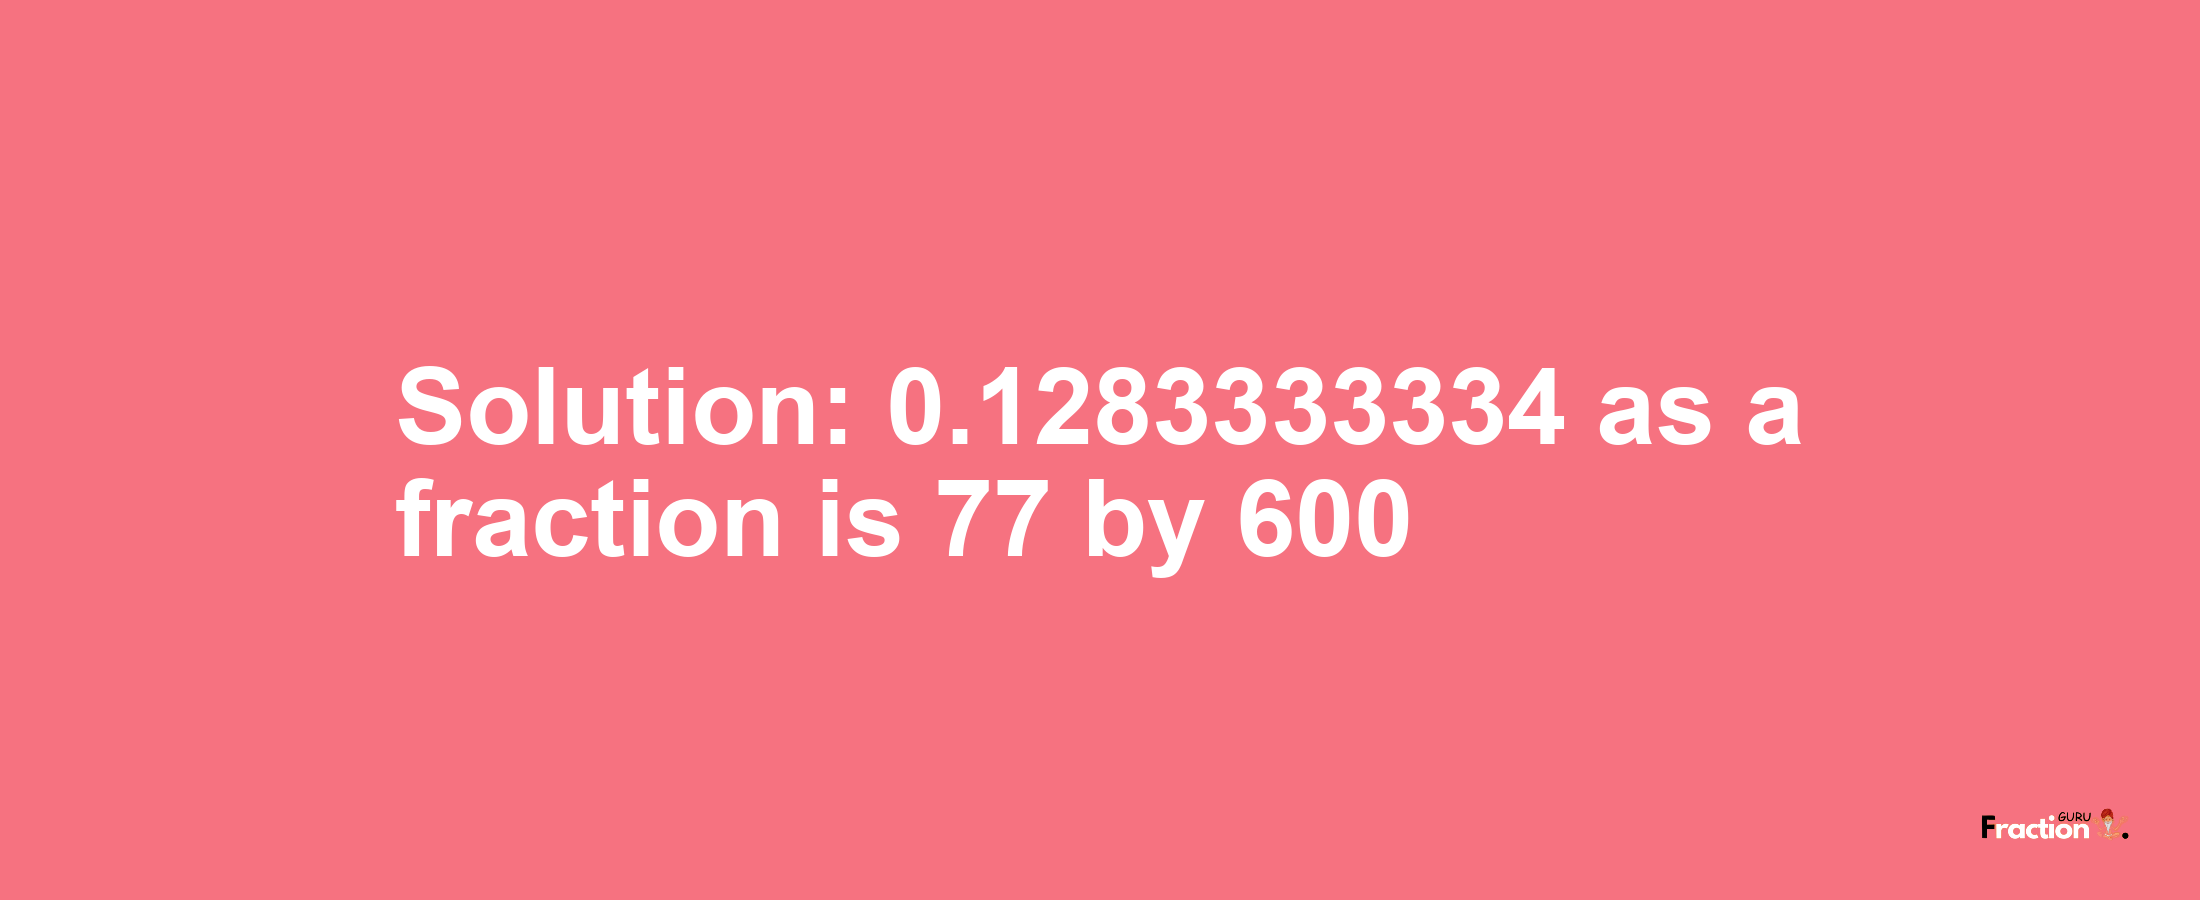 Solution:0.1283333334 as a fraction is 77/600